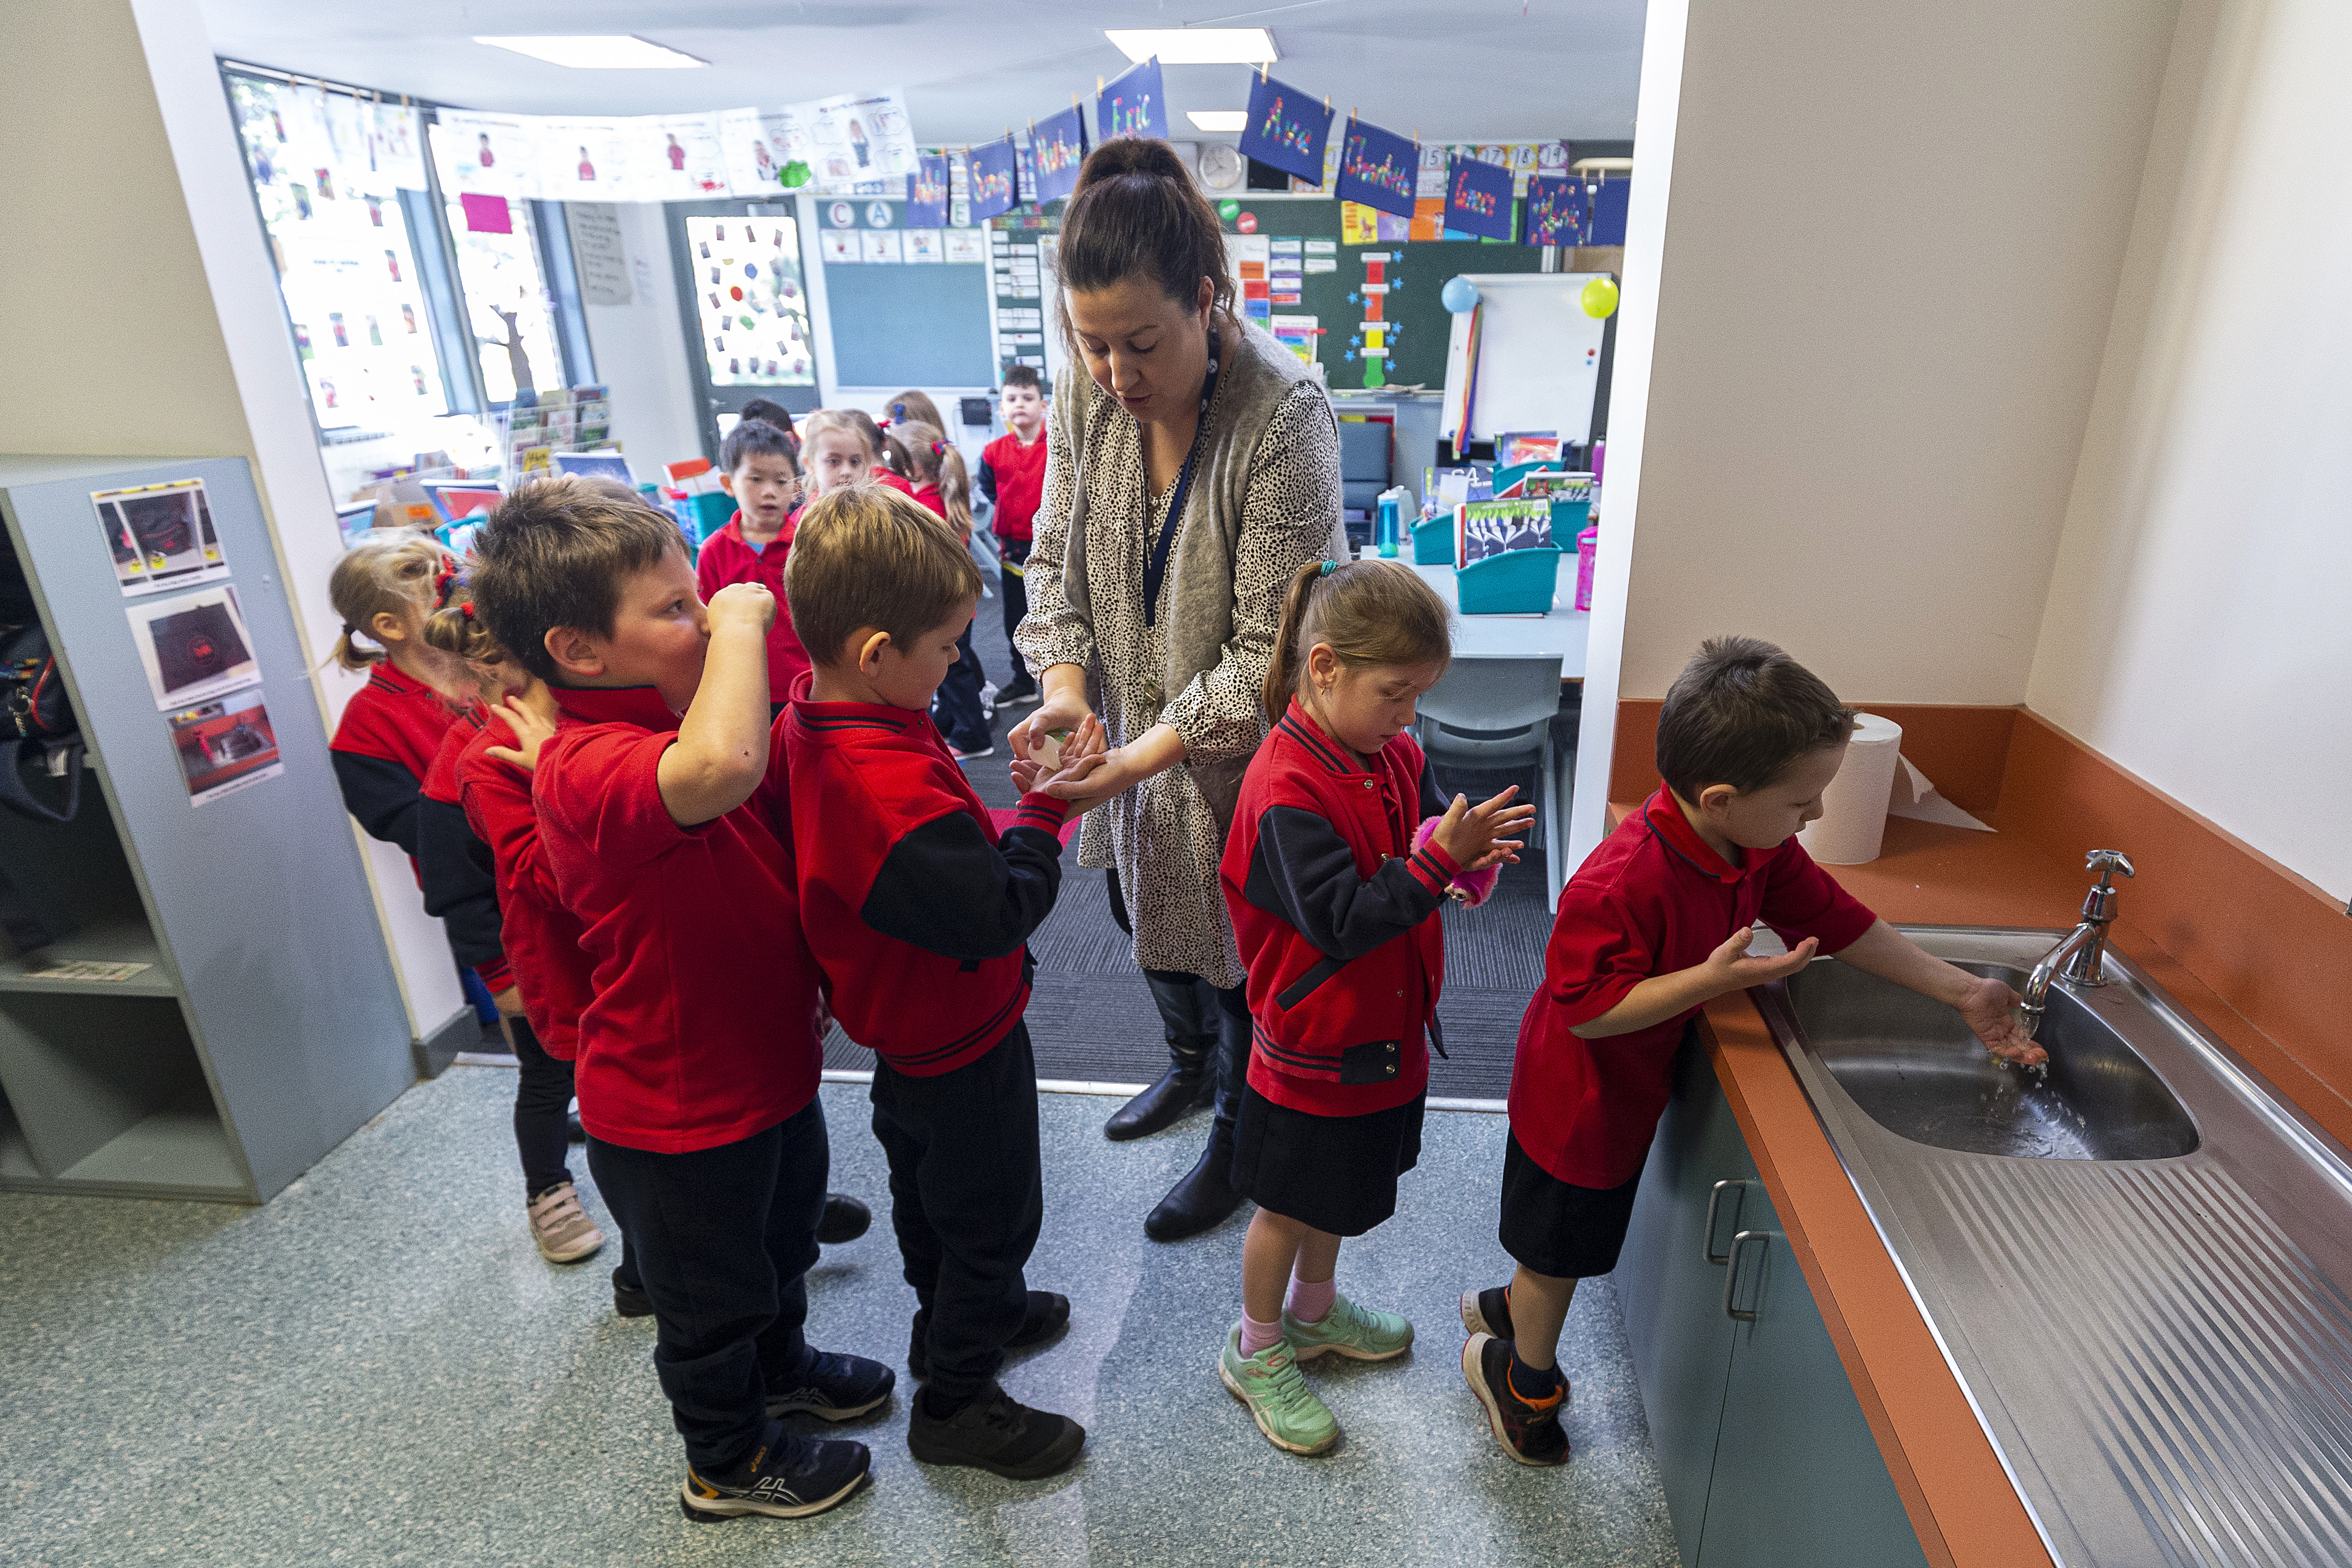 Students sanitize at Lysterfield Primary School on May 26, 2020 in Melbourne, Australia. (Daniel Pockett/Getty Images)